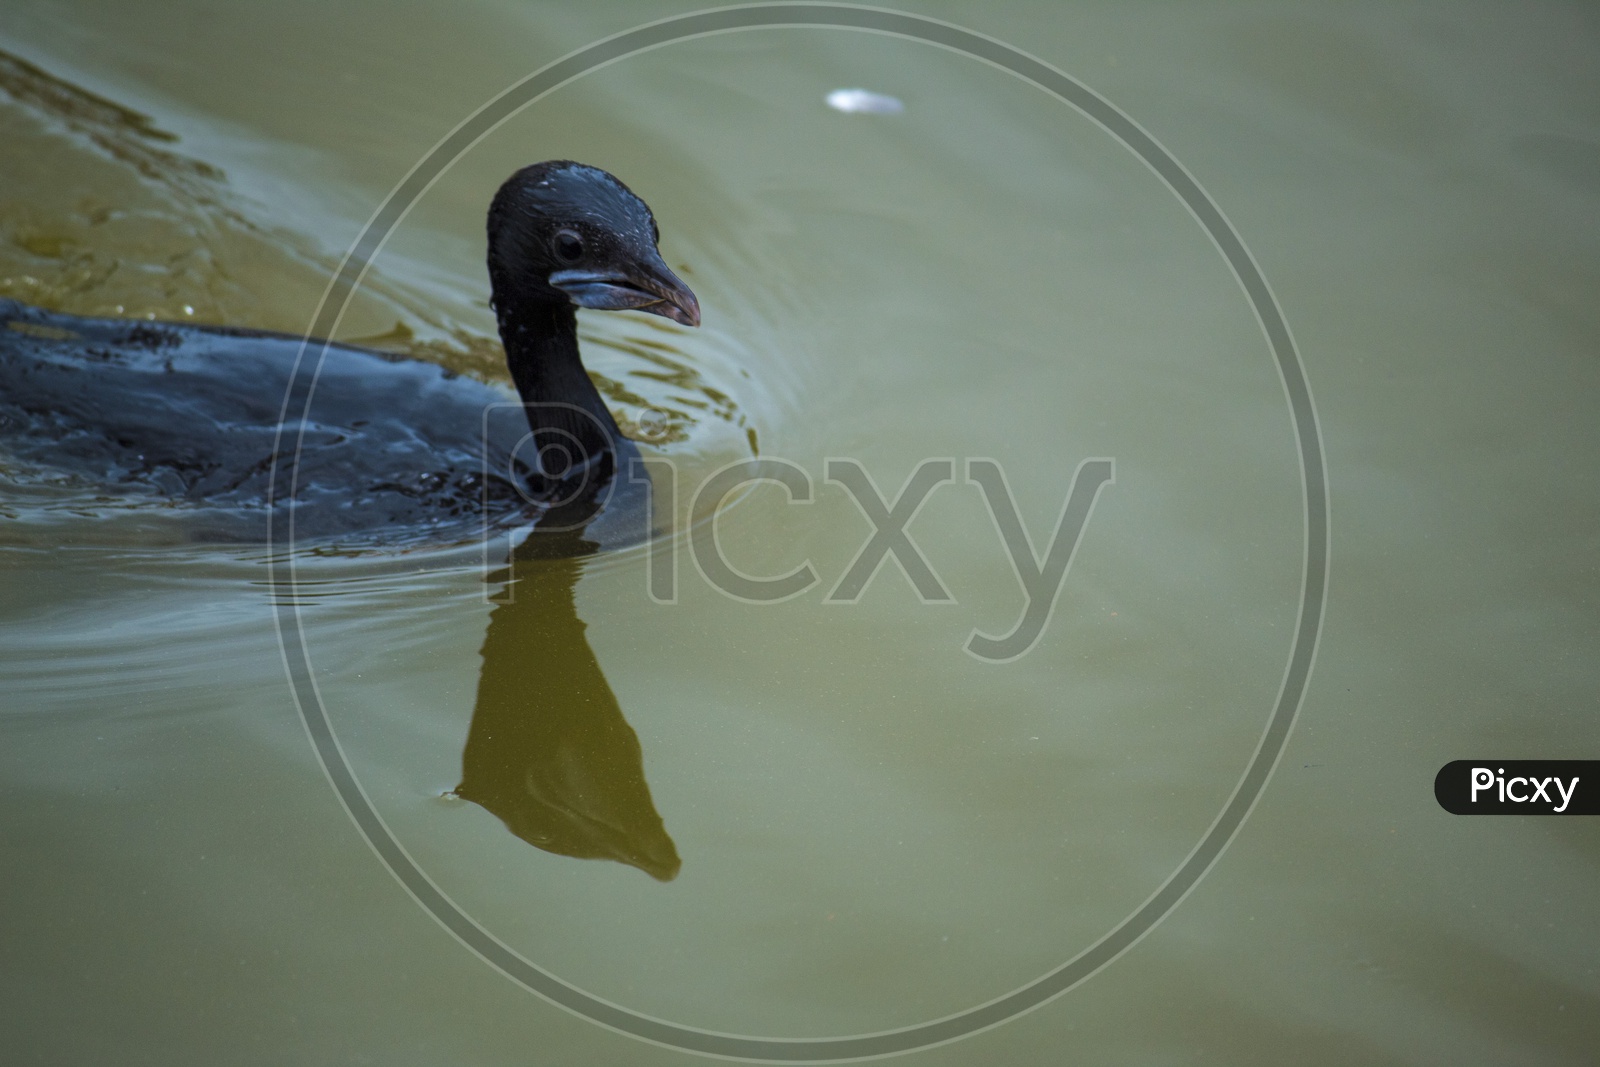 The water duck